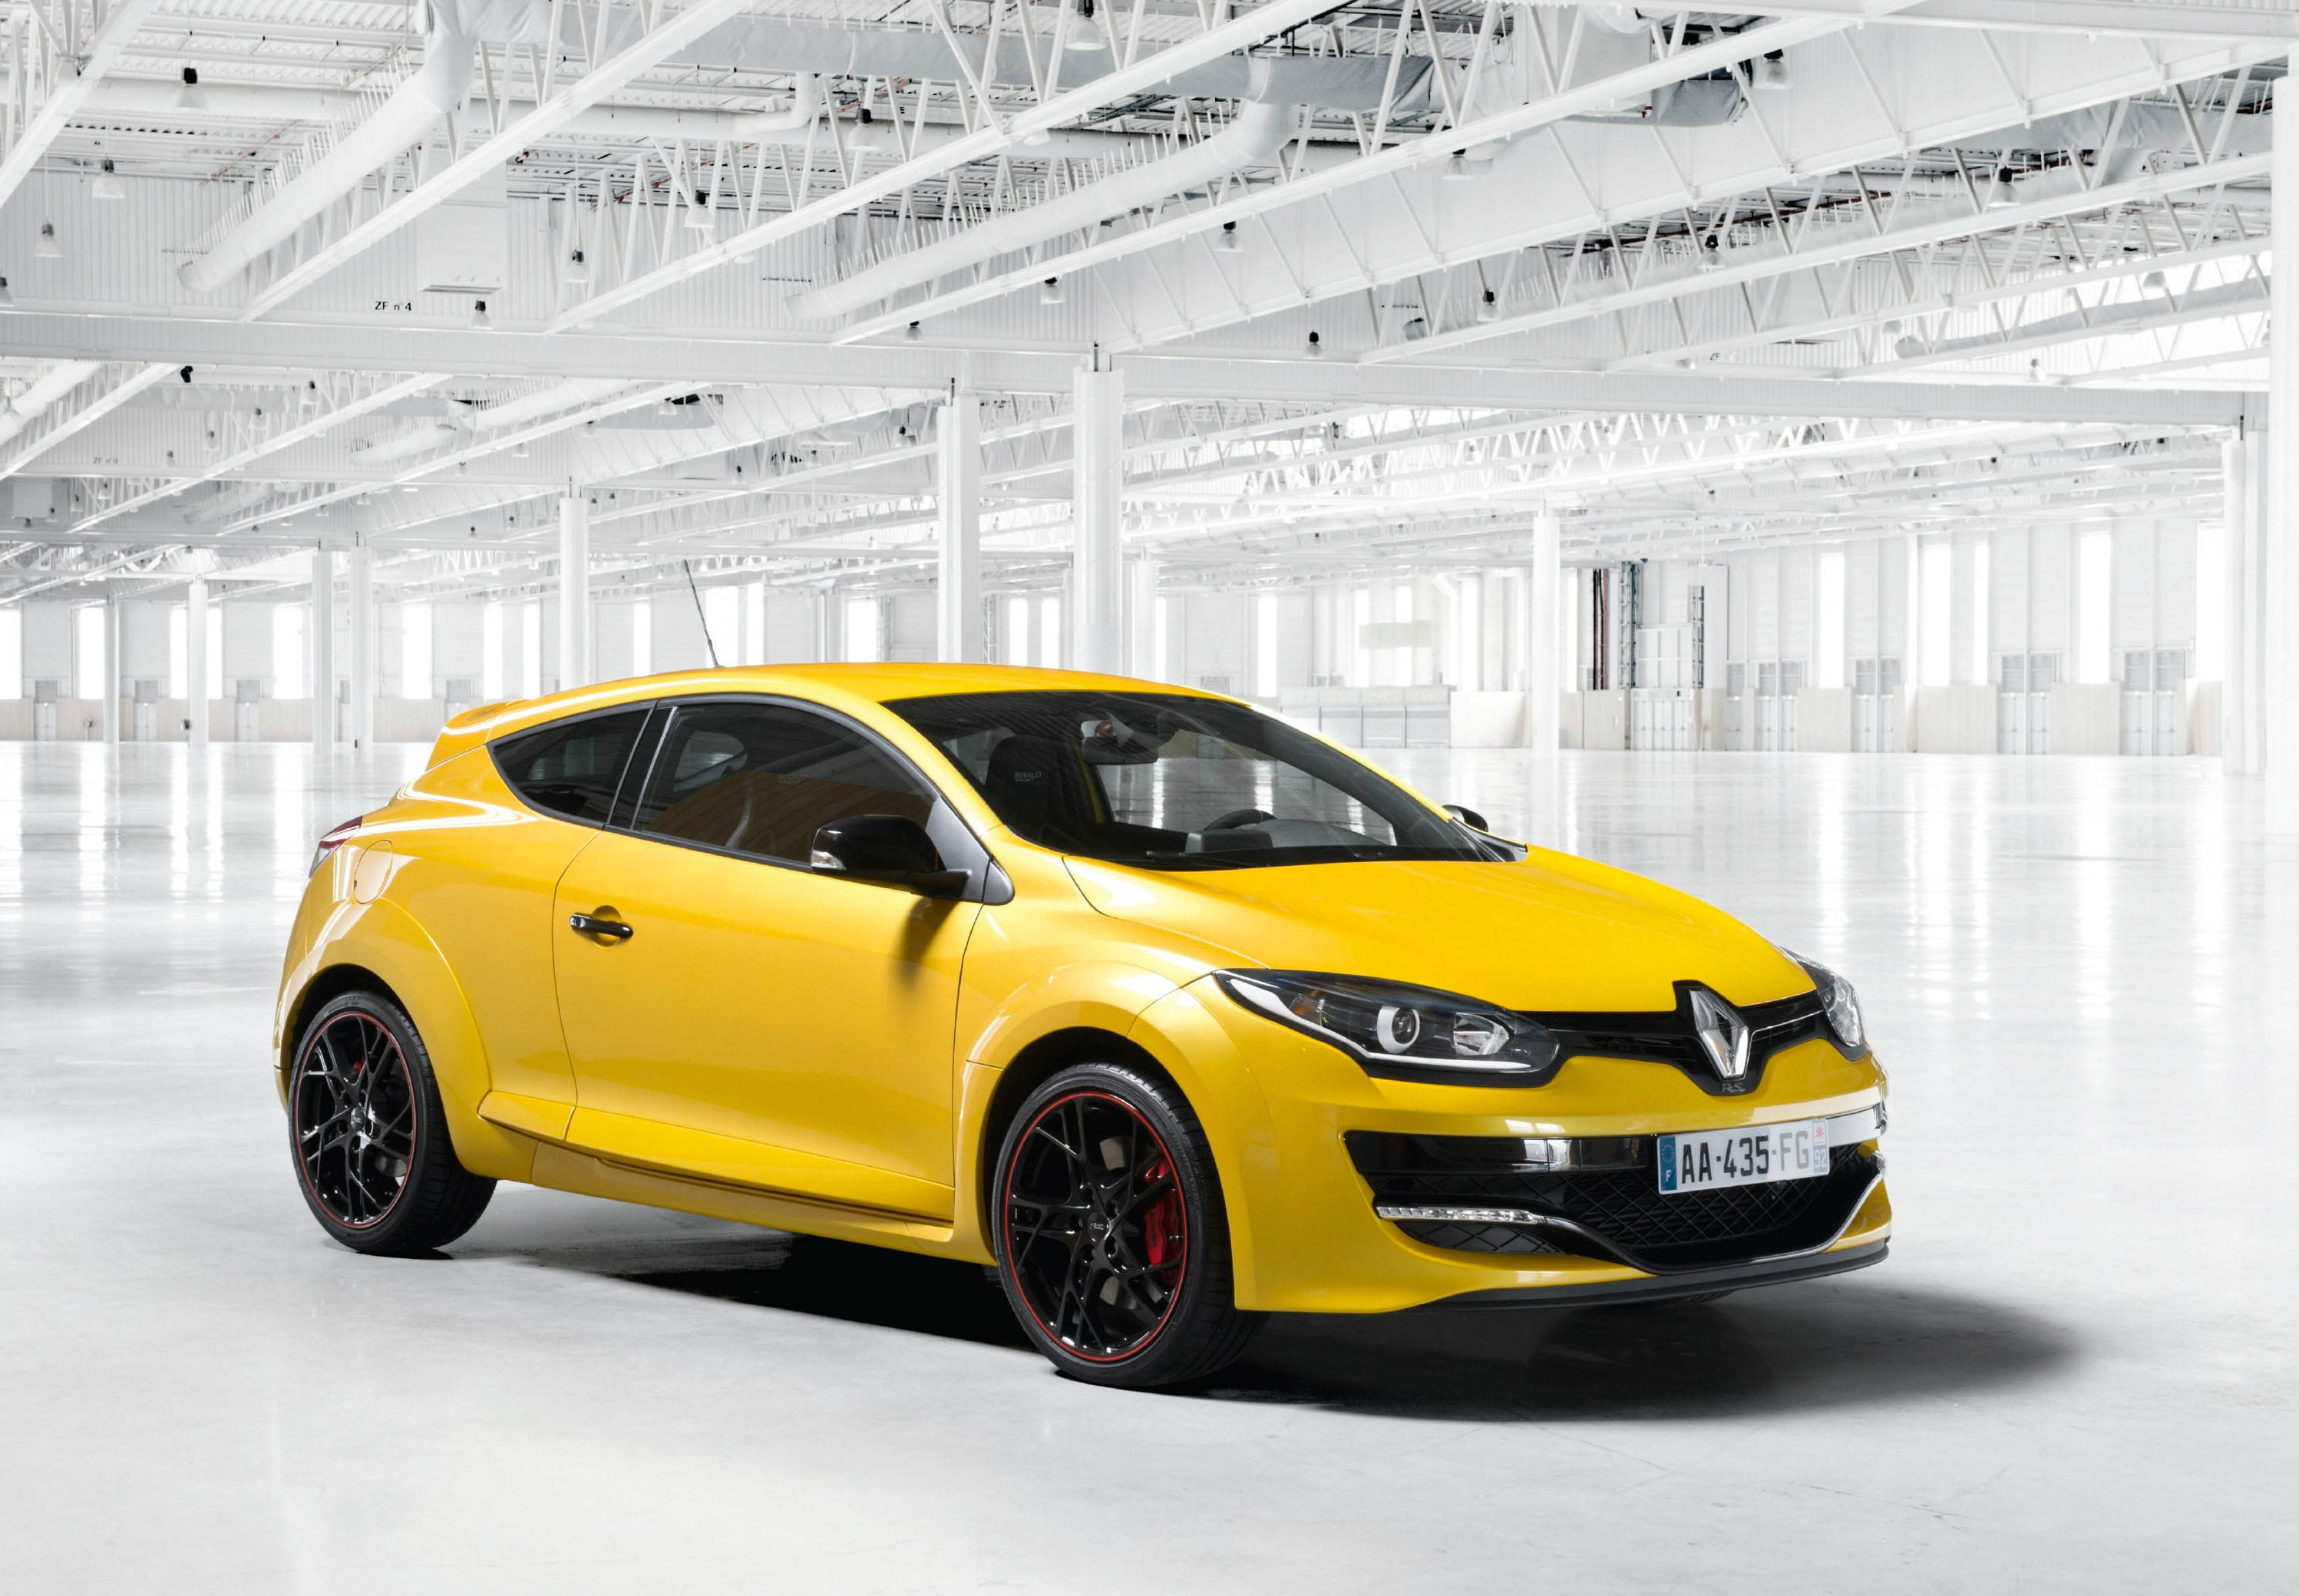 Buying guide to French sports cars includes the Renaultsport Megane 265